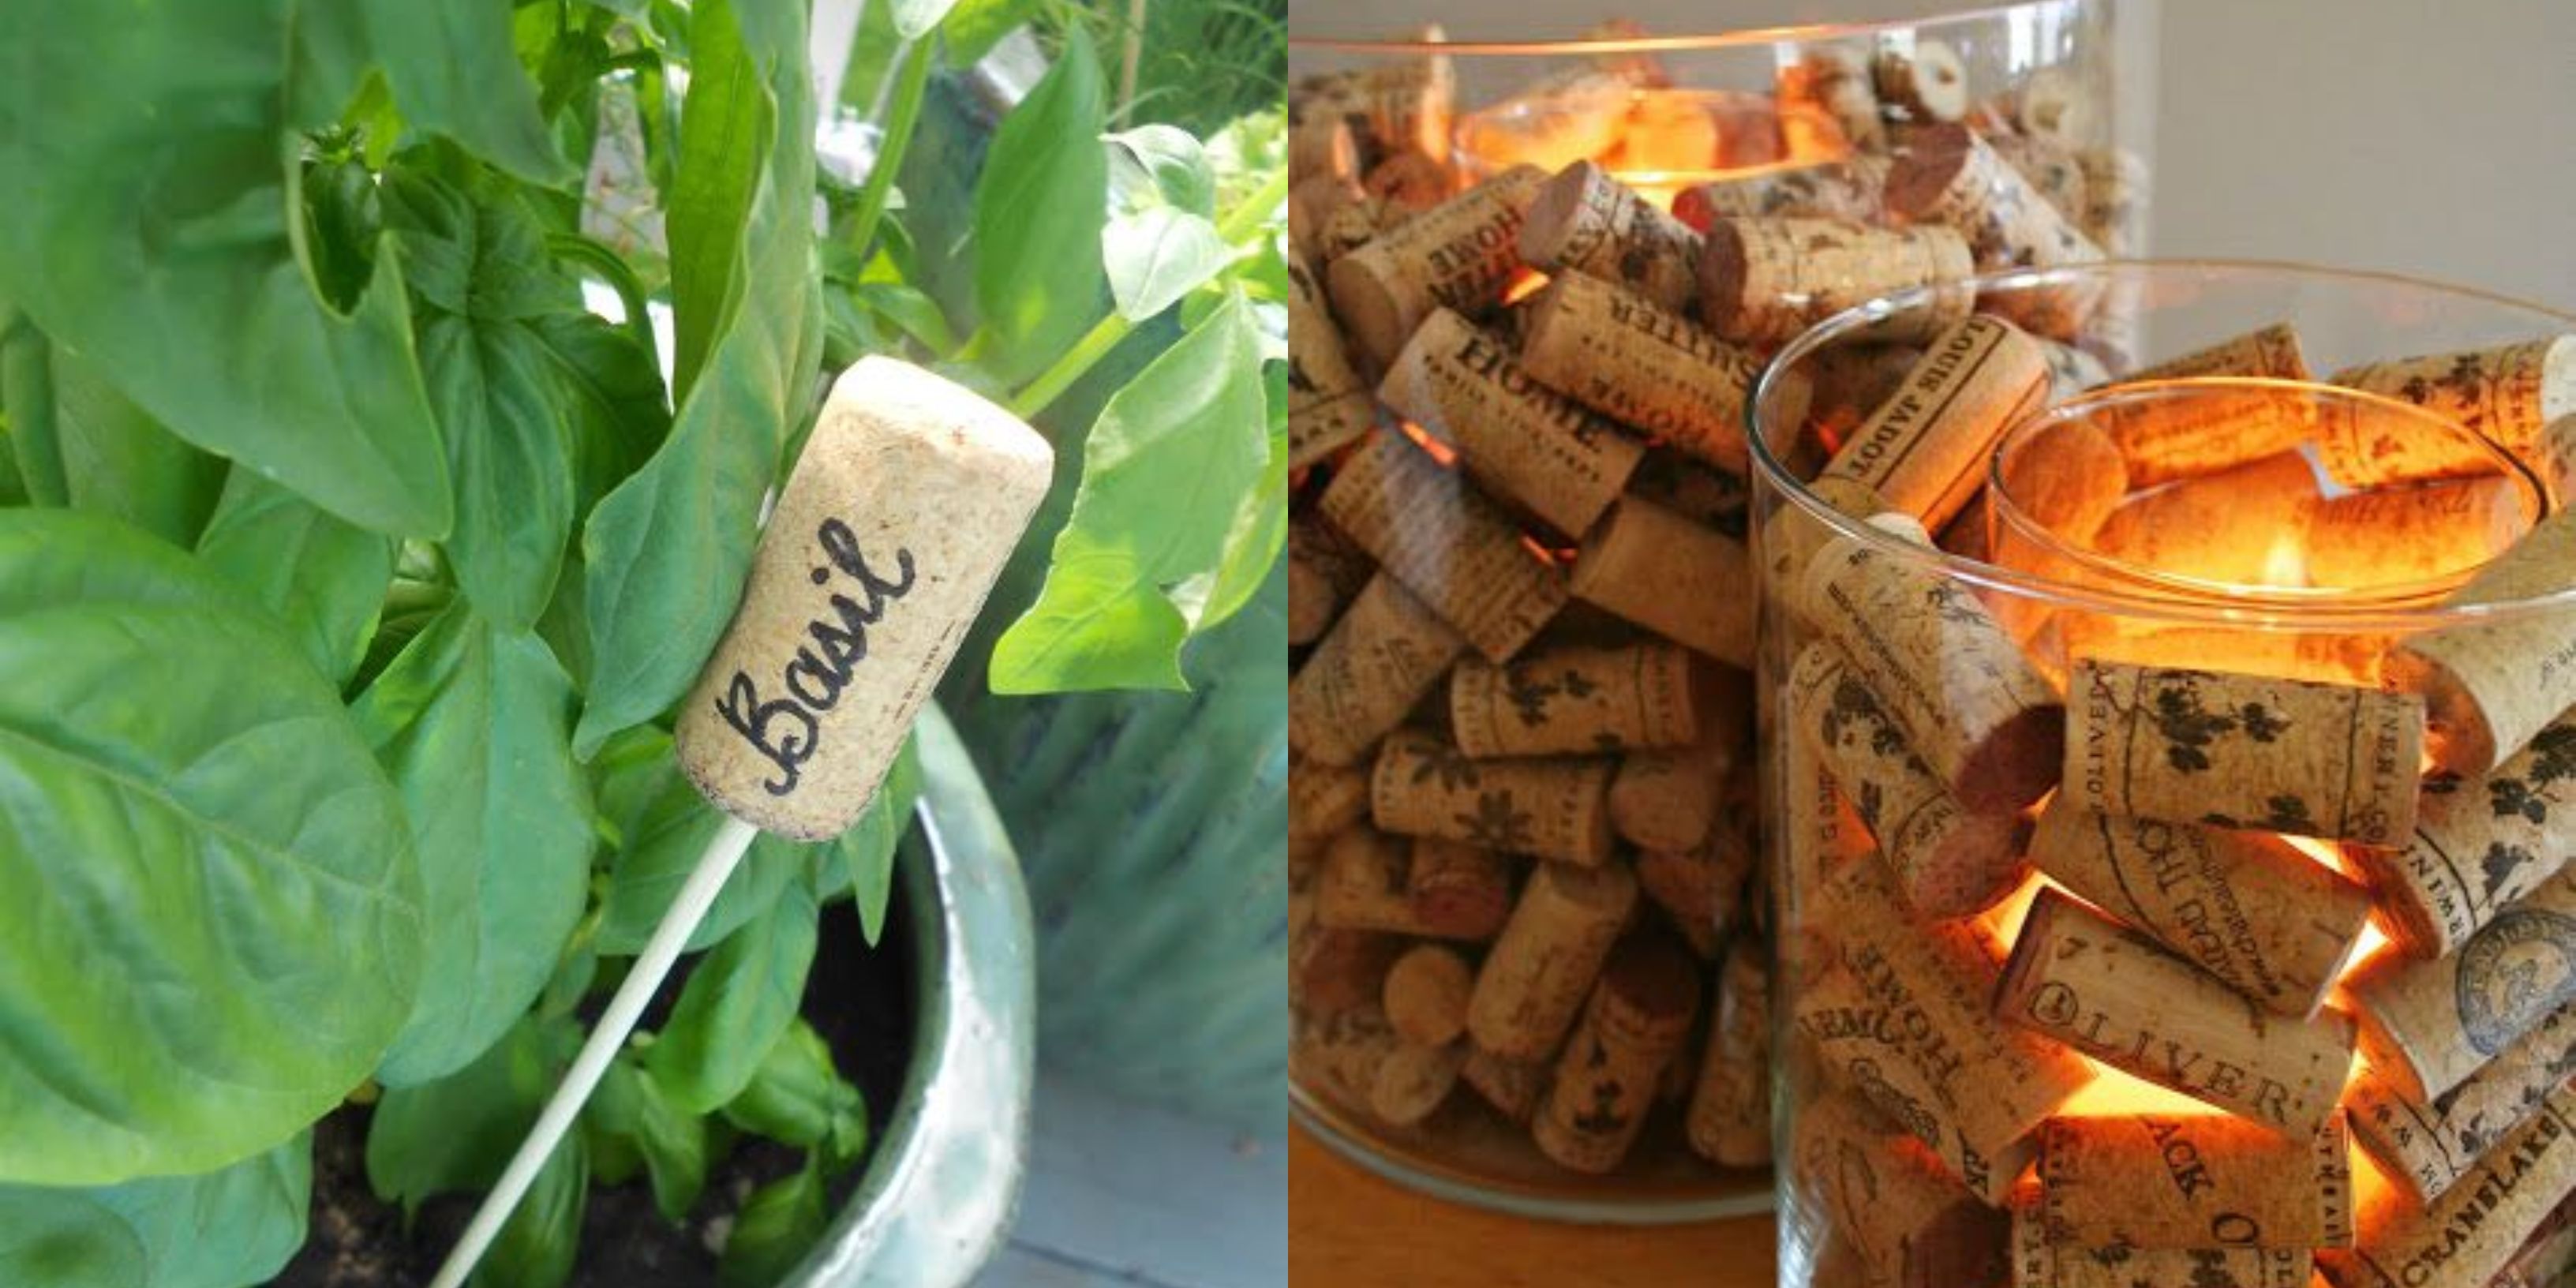 26 Wine Cork Crafts - Fun & Pretty Projects Using Recycled Wine Corks